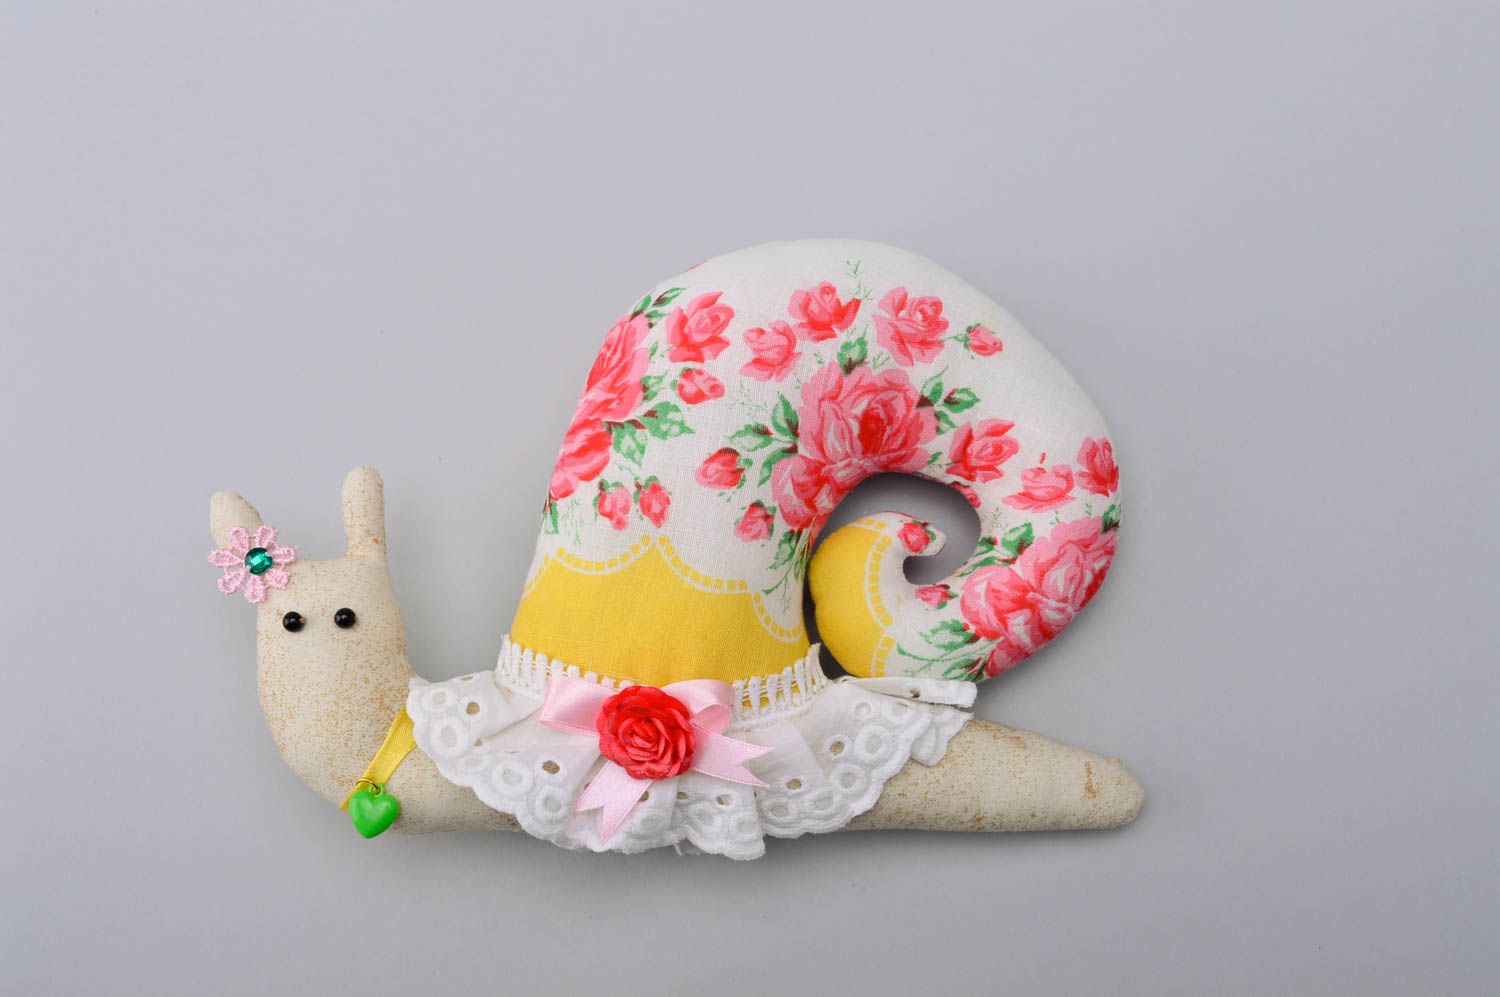 Soft toy handmade toy animal snail toy birthday gifts for kids home decor photo 2